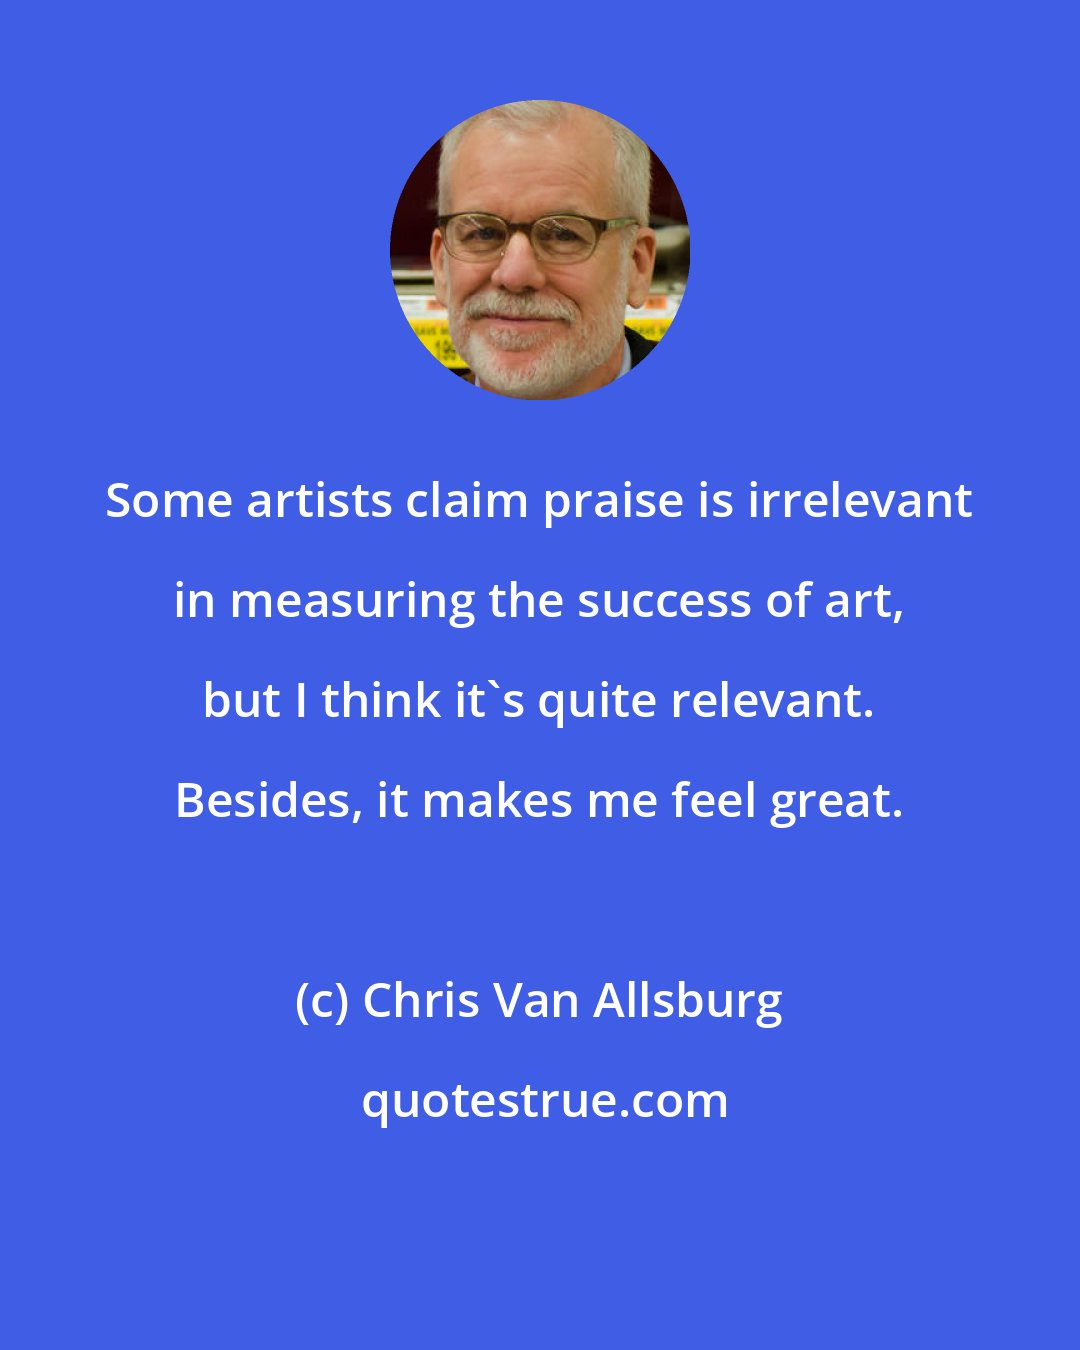 Chris Van Allsburg: Some artists claim praise is irrelevant in measuring the success of art, but I think it's quite relevant. Besides, it makes me feel great.